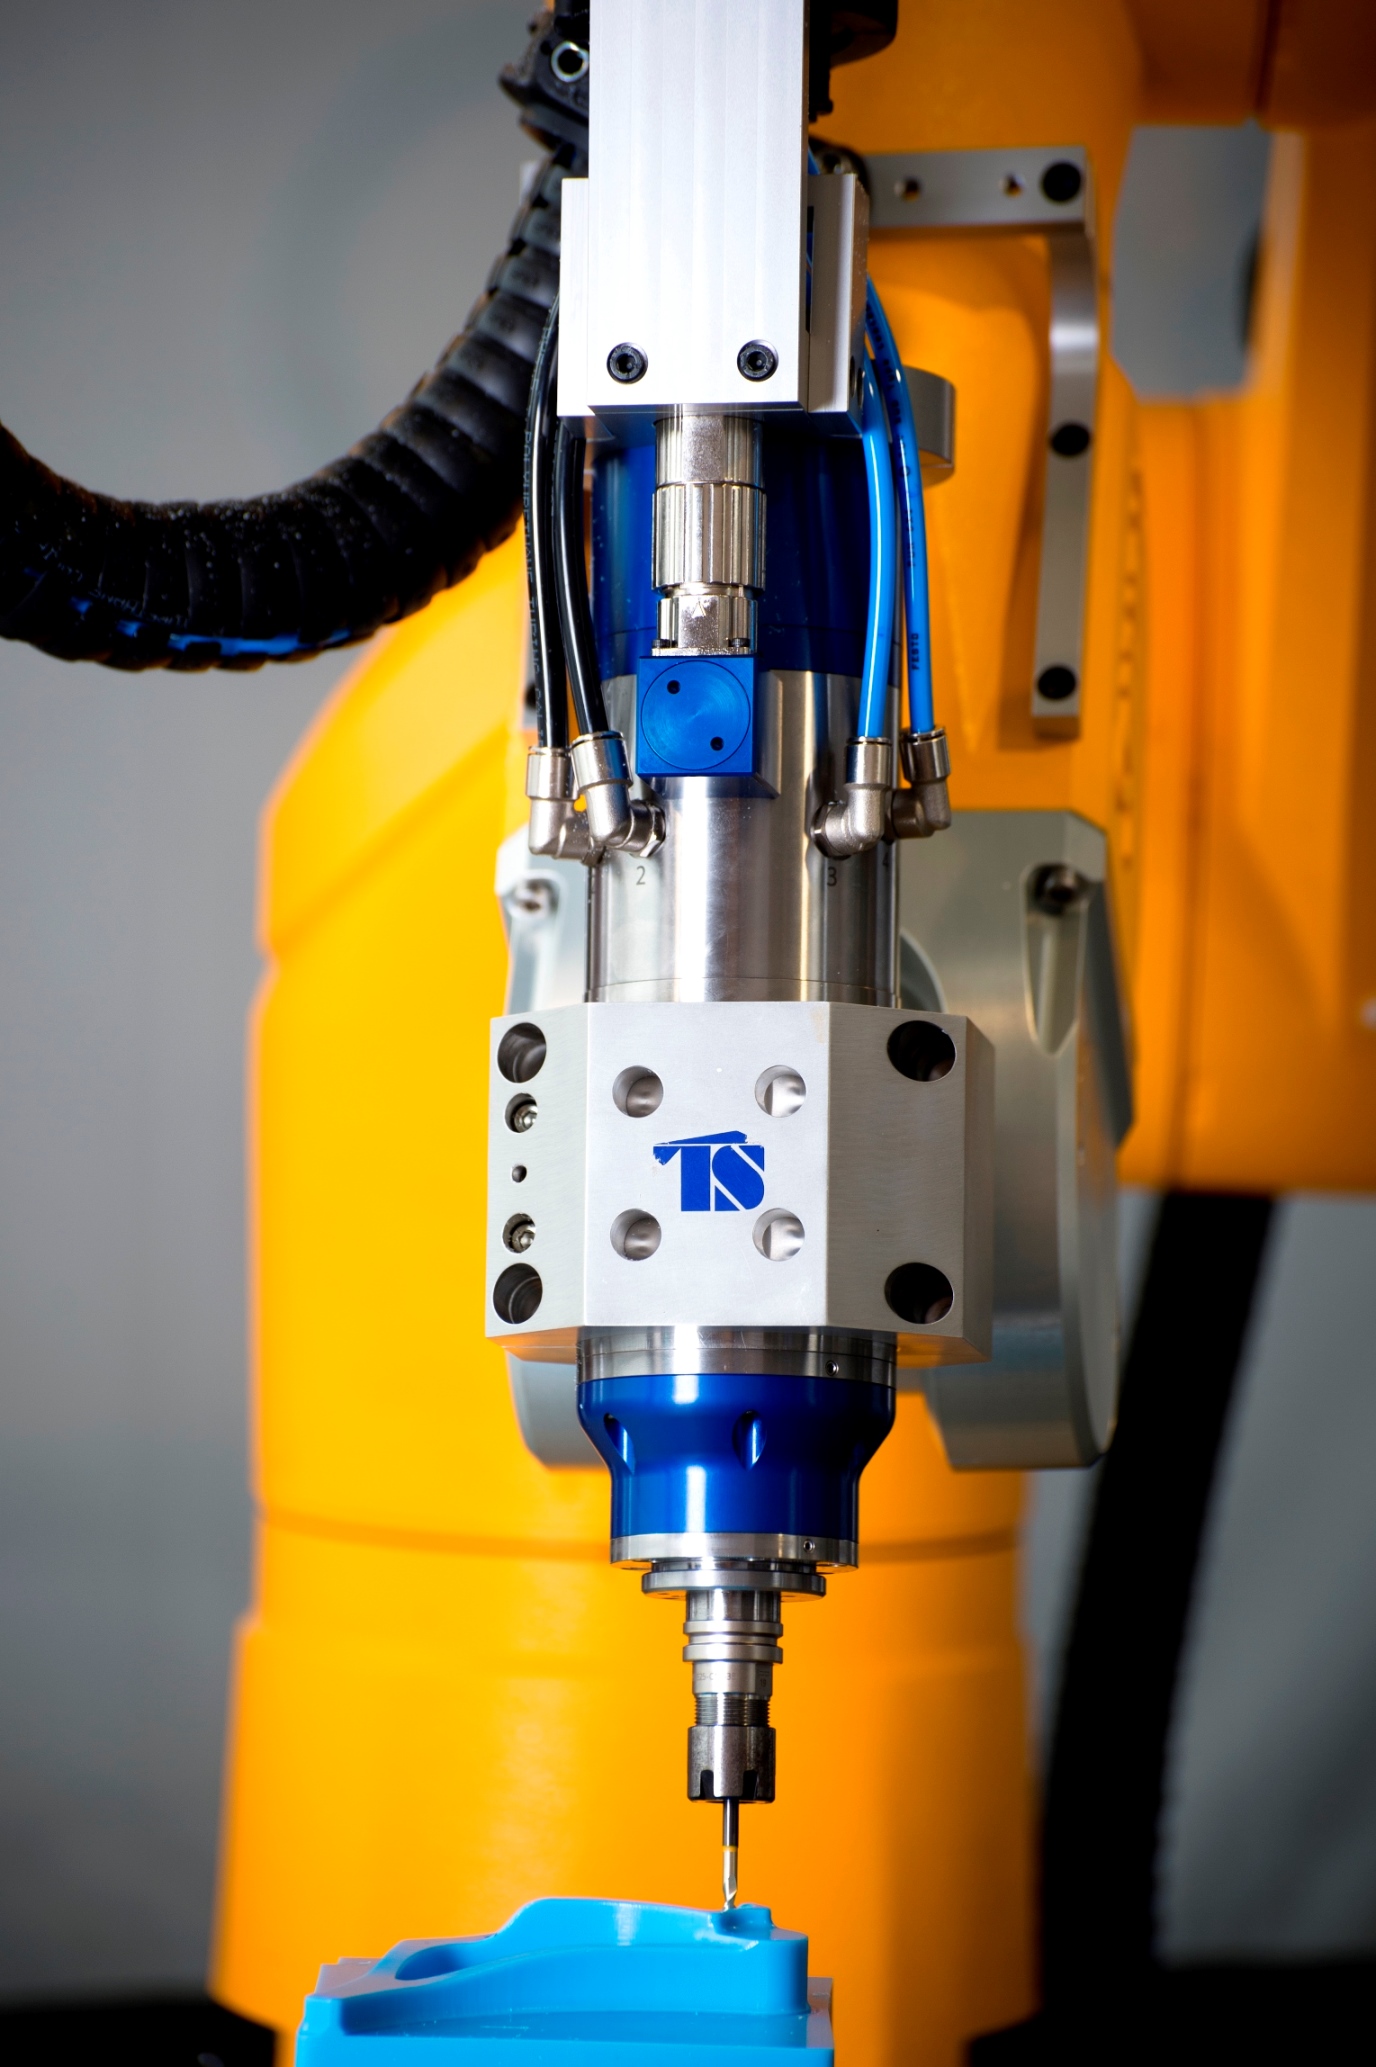 Machine Tool 2.0: Milling with Robots| Metalworking